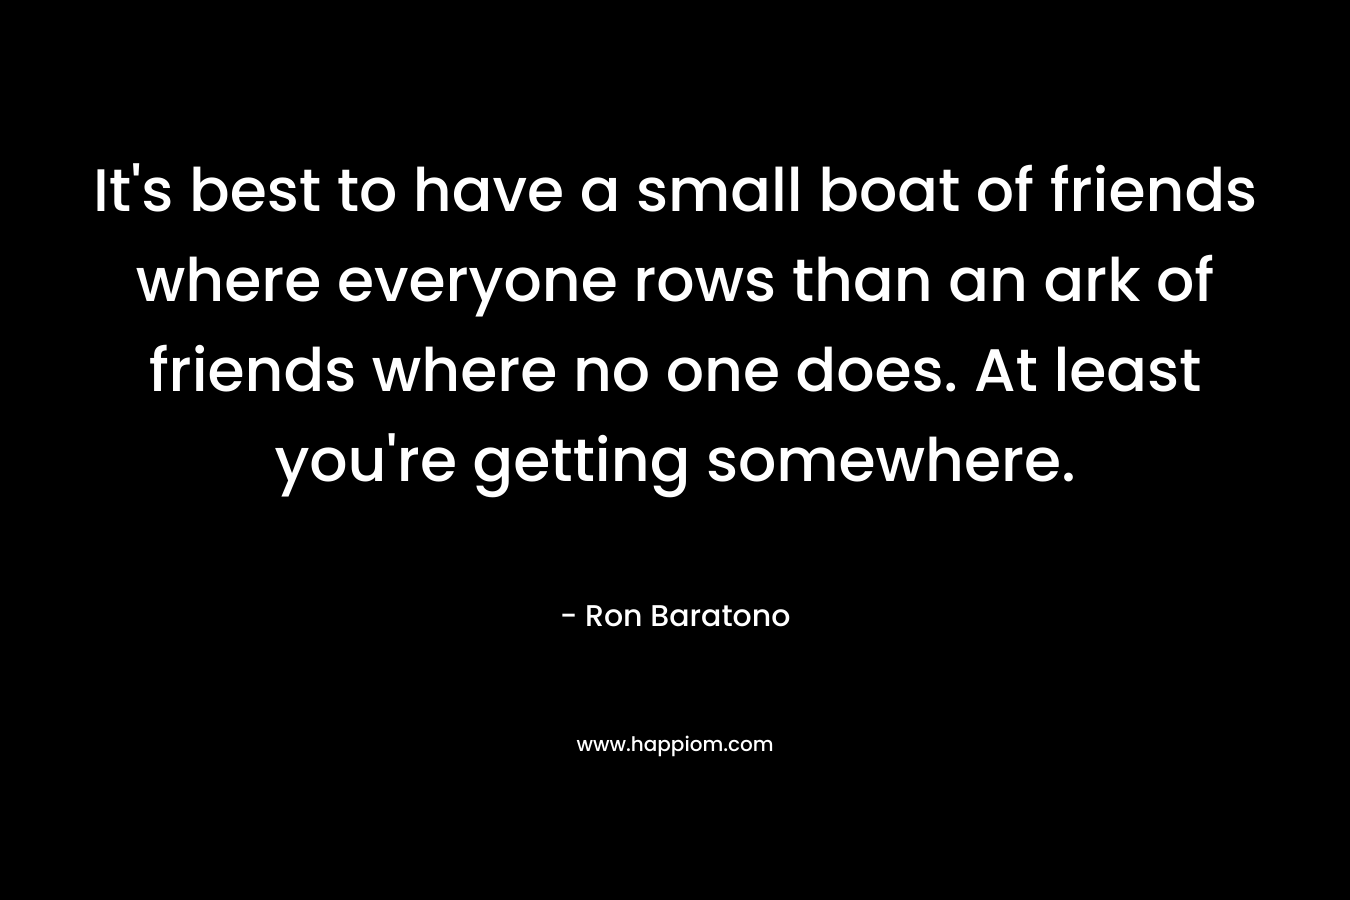 It’s best to have a small boat of friends where everyone rows than an ark of friends where no one does. At least you’re getting somewhere. – Ron Baratono